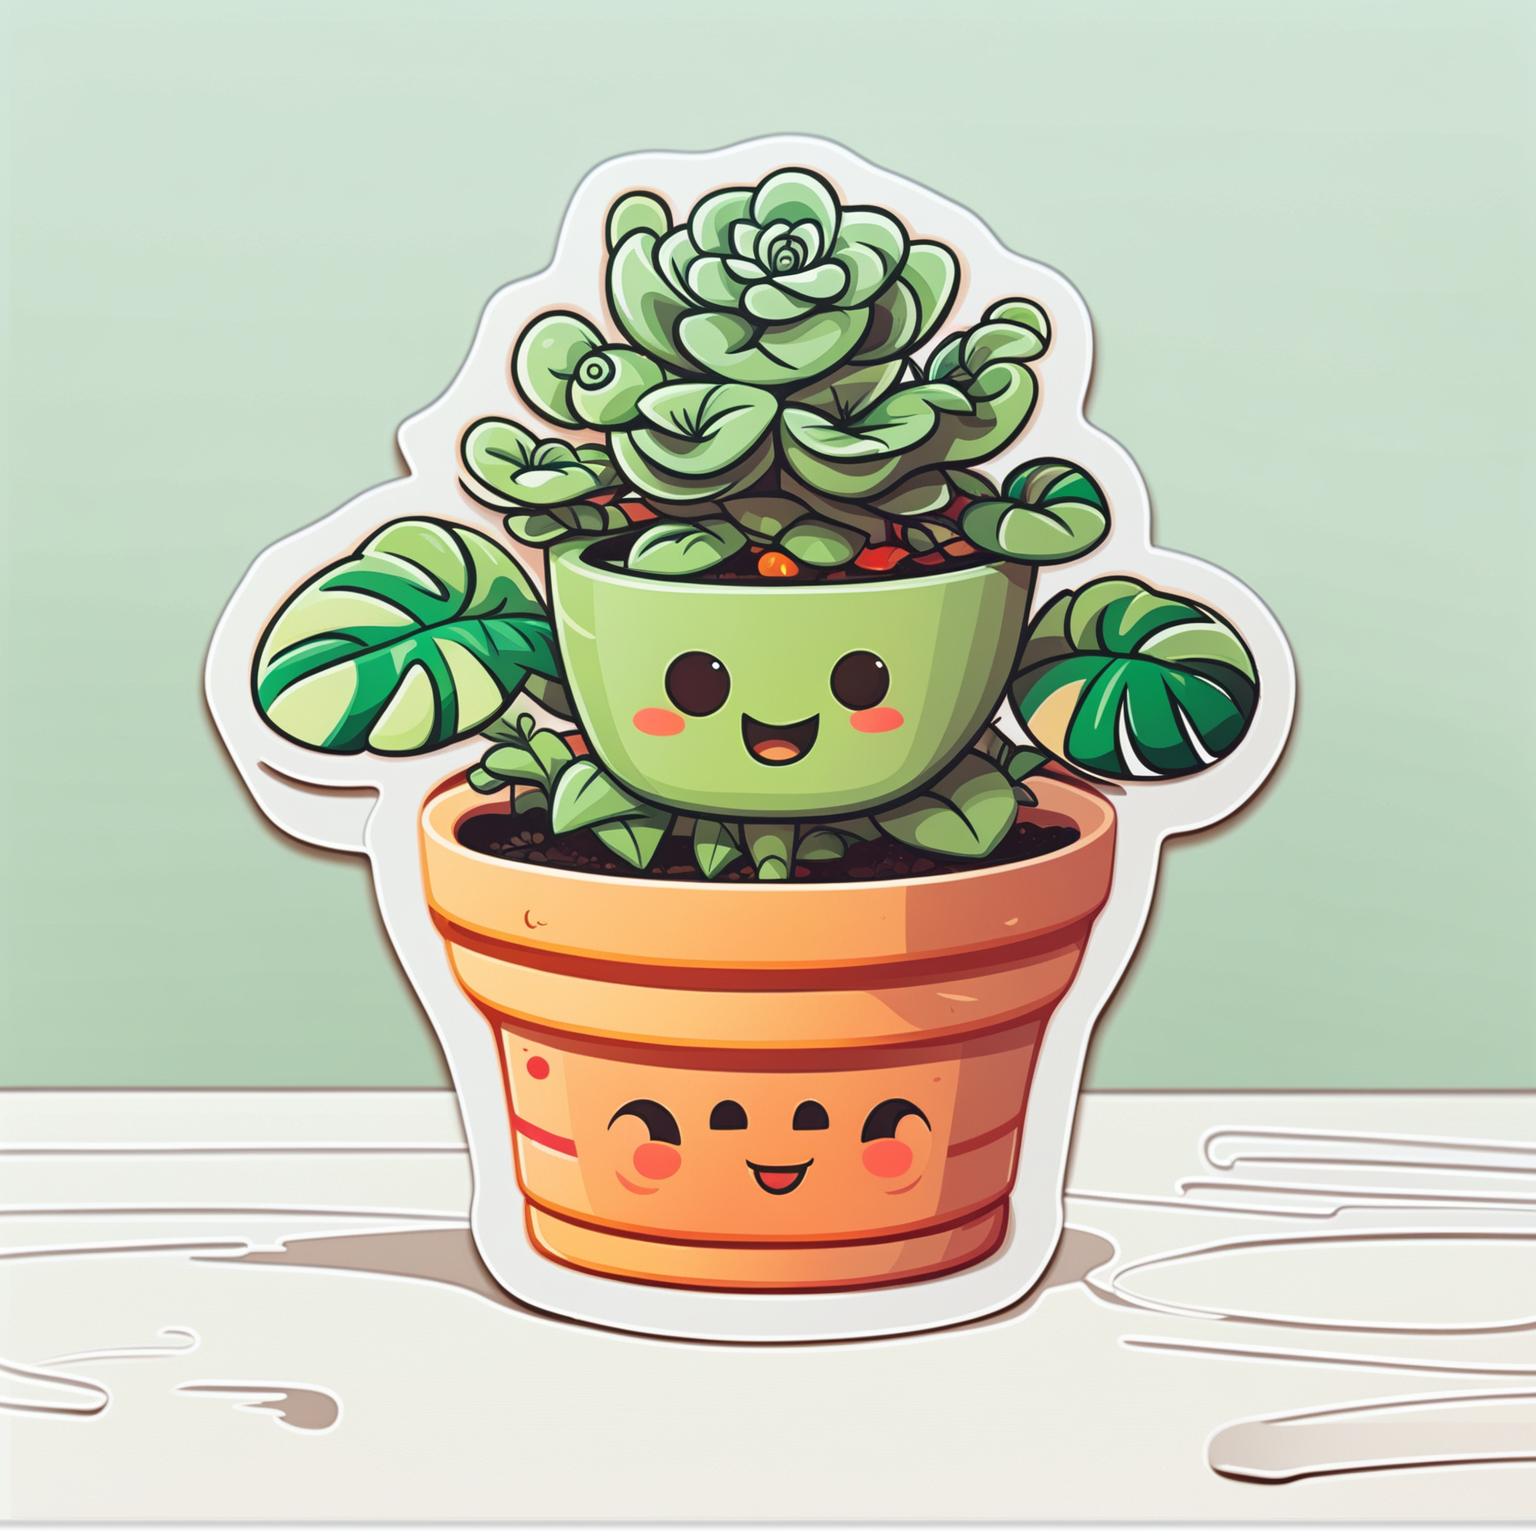 Design a cute sticker featuring a potted plant with lush leaves or flowers